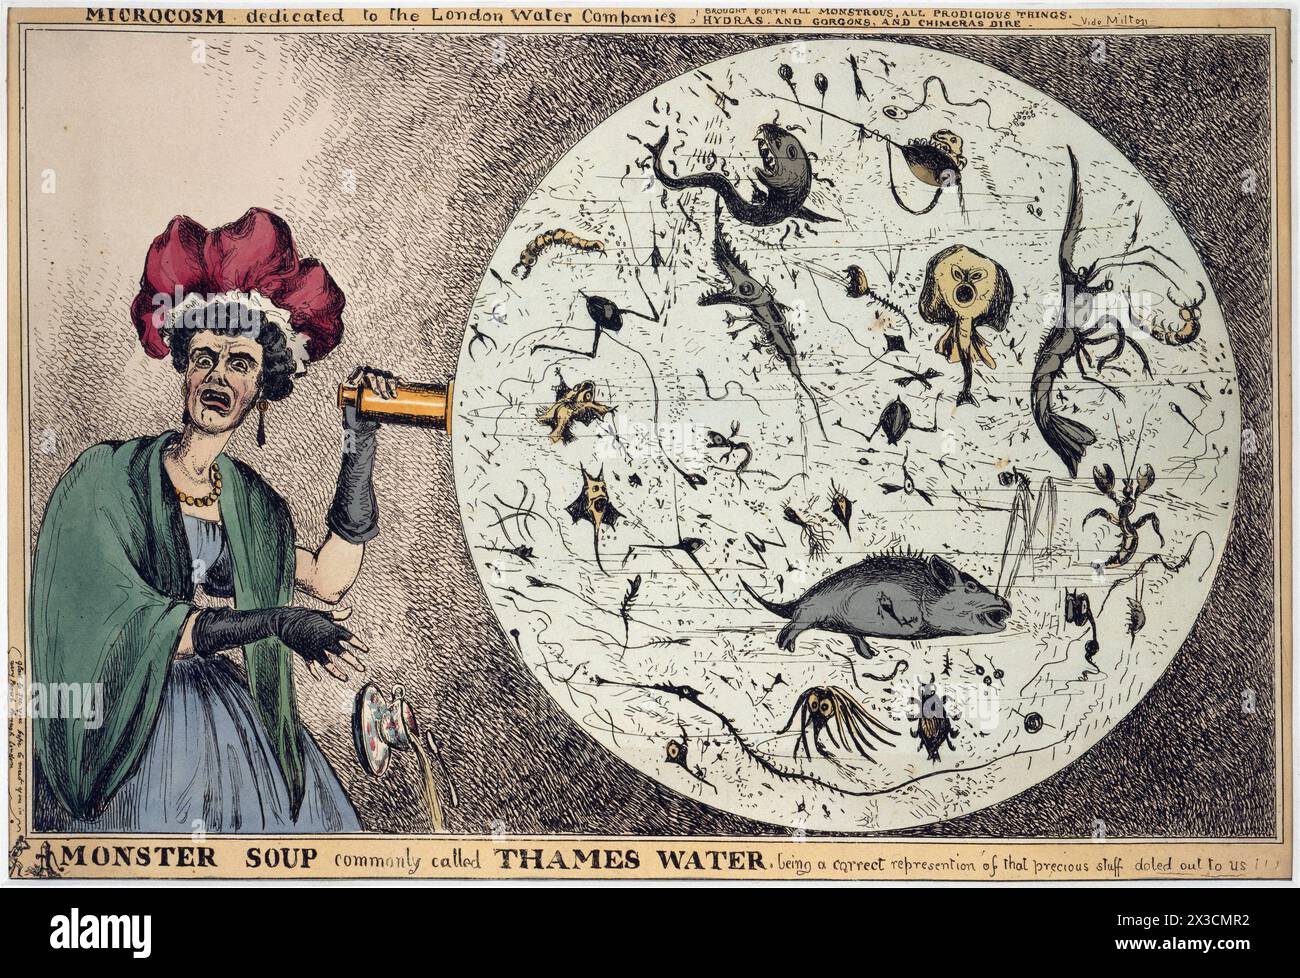 Water pollution - Contents of a Magnified Drop of Thames Water Revealing the Impurity of London Drinking Water. - British poster 1828, caricature - cartoon - William Heath illustration Stock Photo